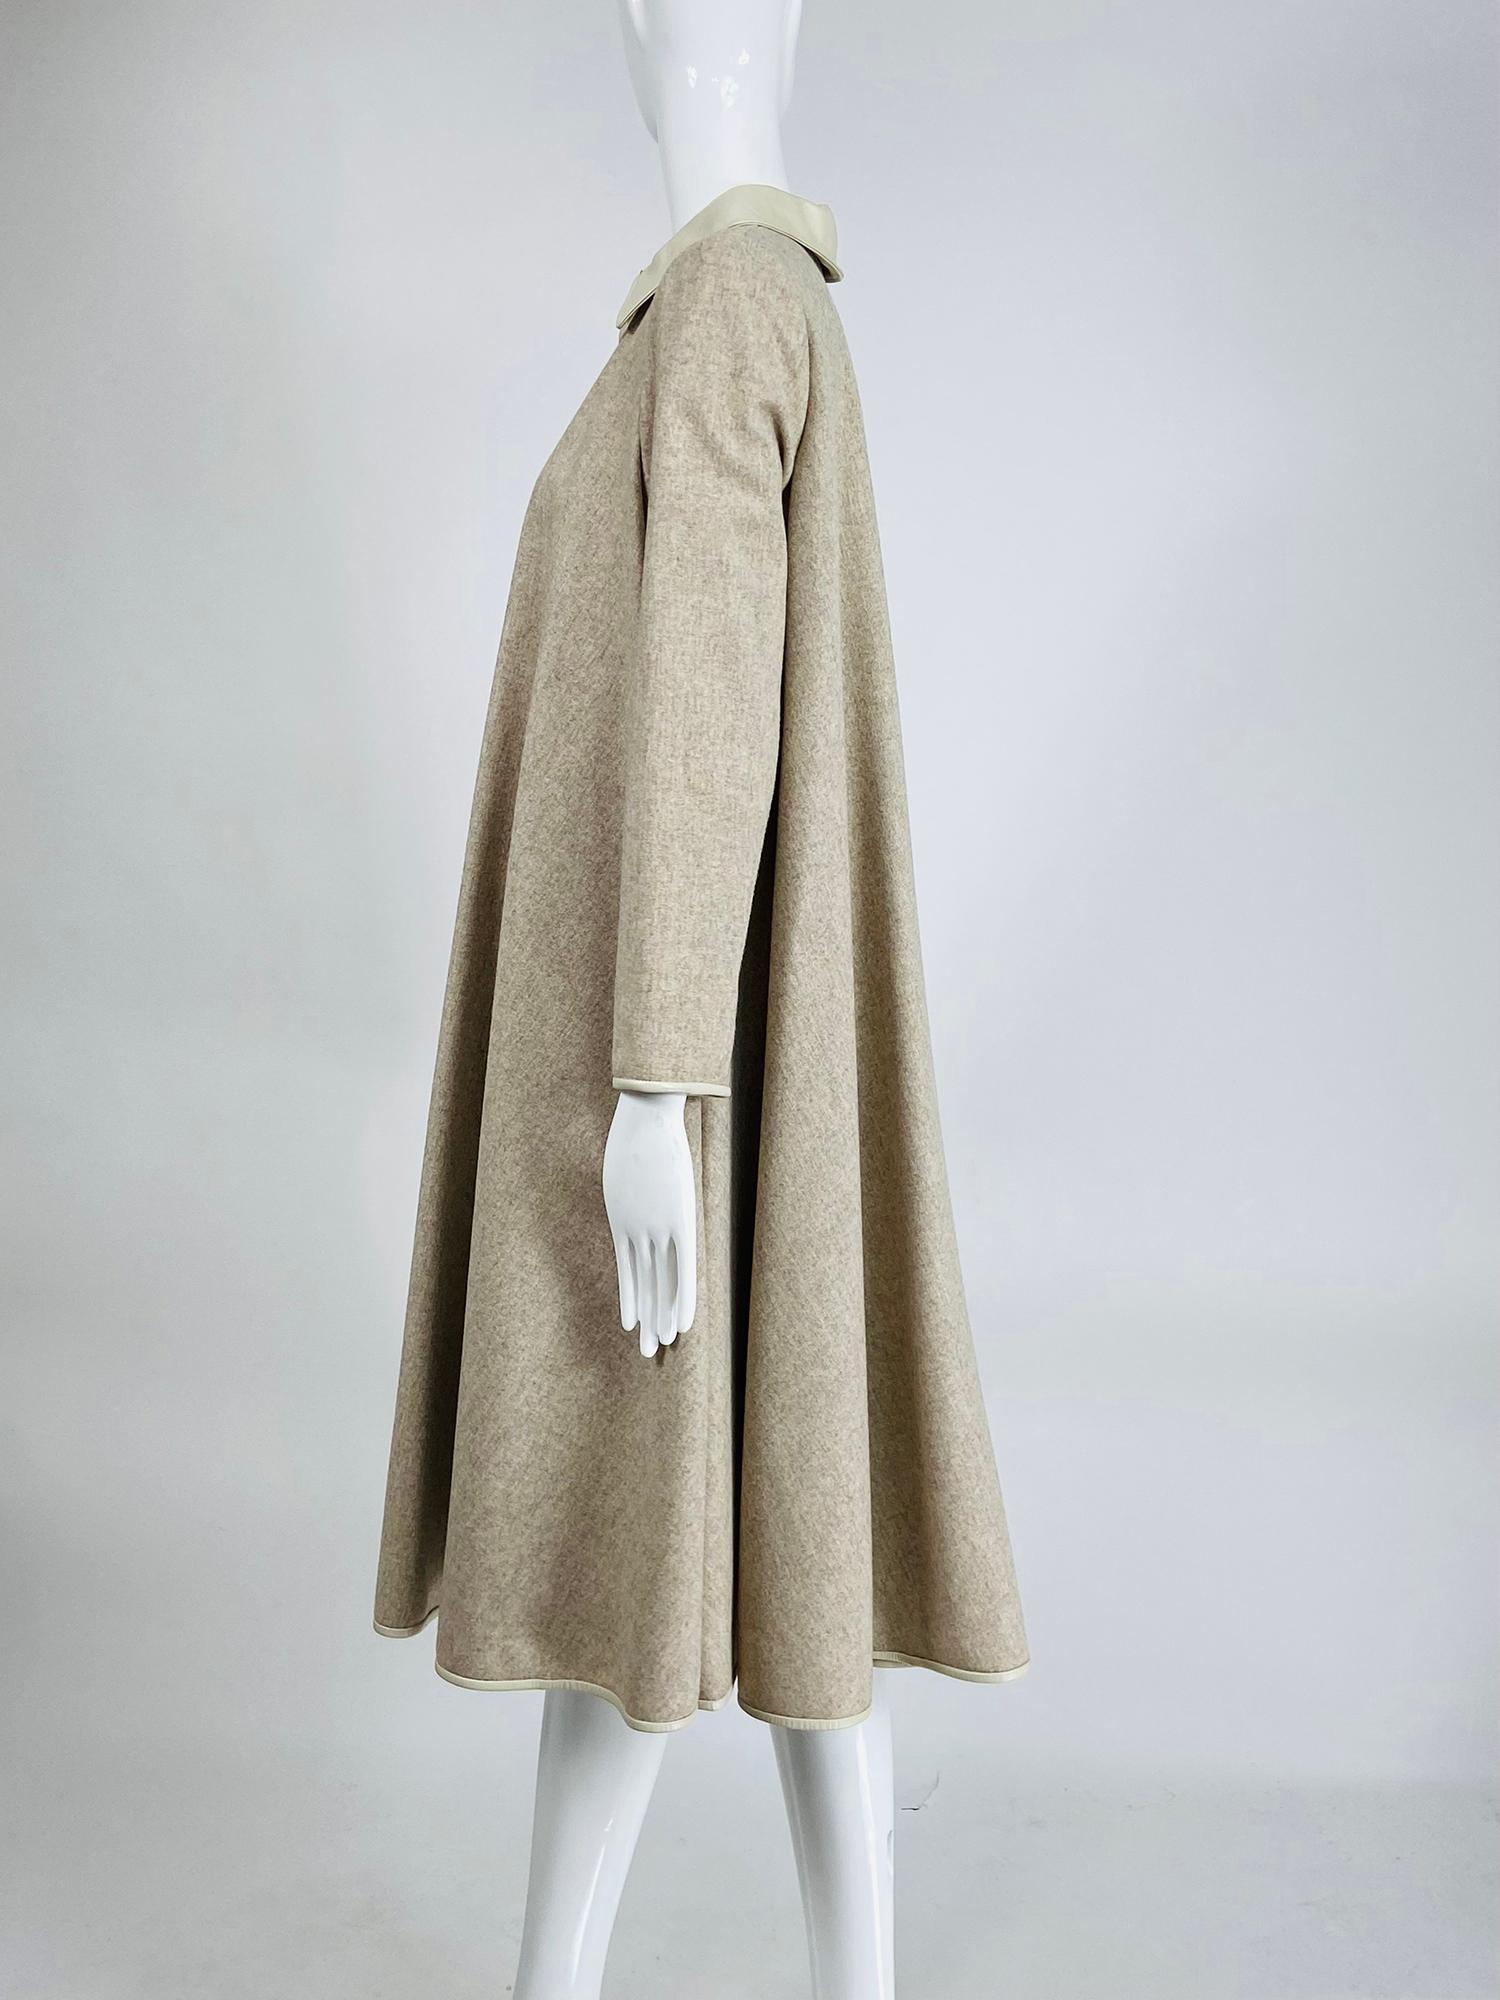 Women's Bonnie Cashin Oatmeal Double Faced Wool Bias Circle Leather Trimmed Coat 1970s For Sale